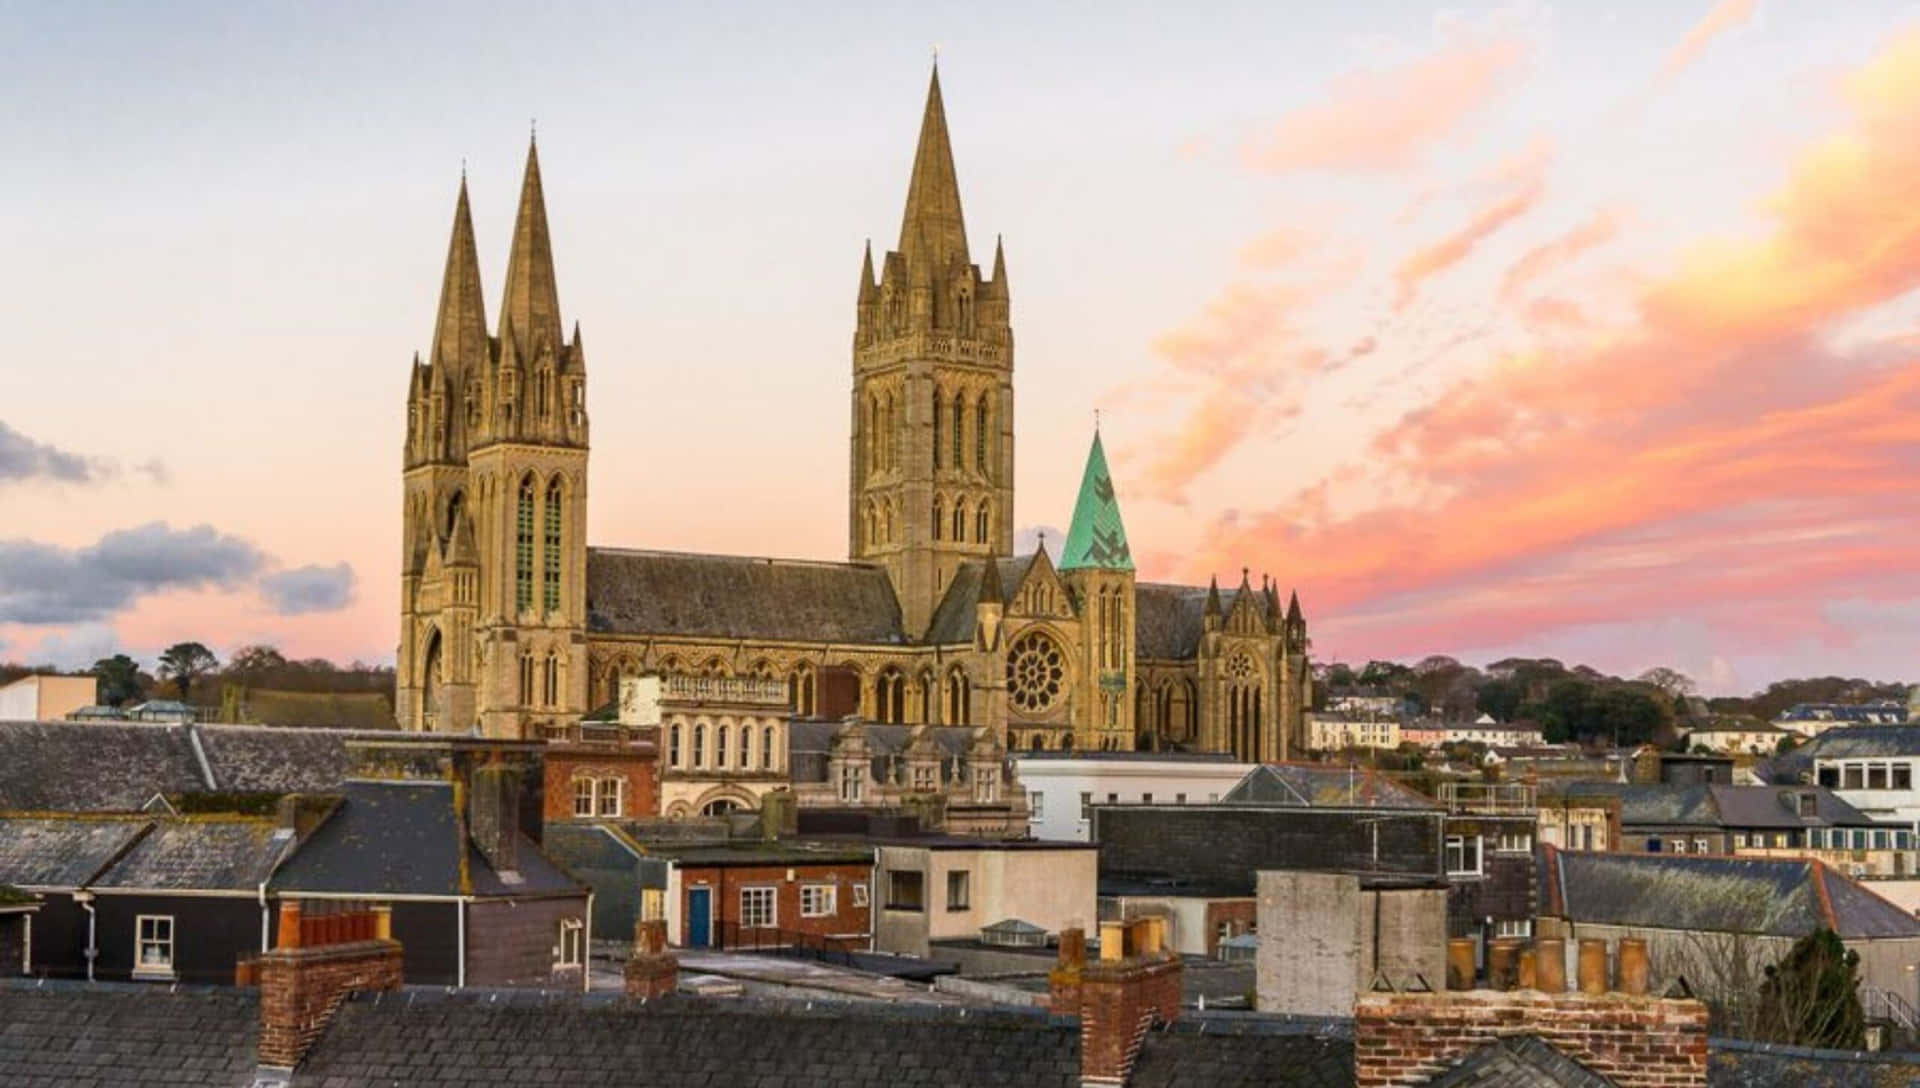 Truro Cathedral Sunset Skyline Wallpaper